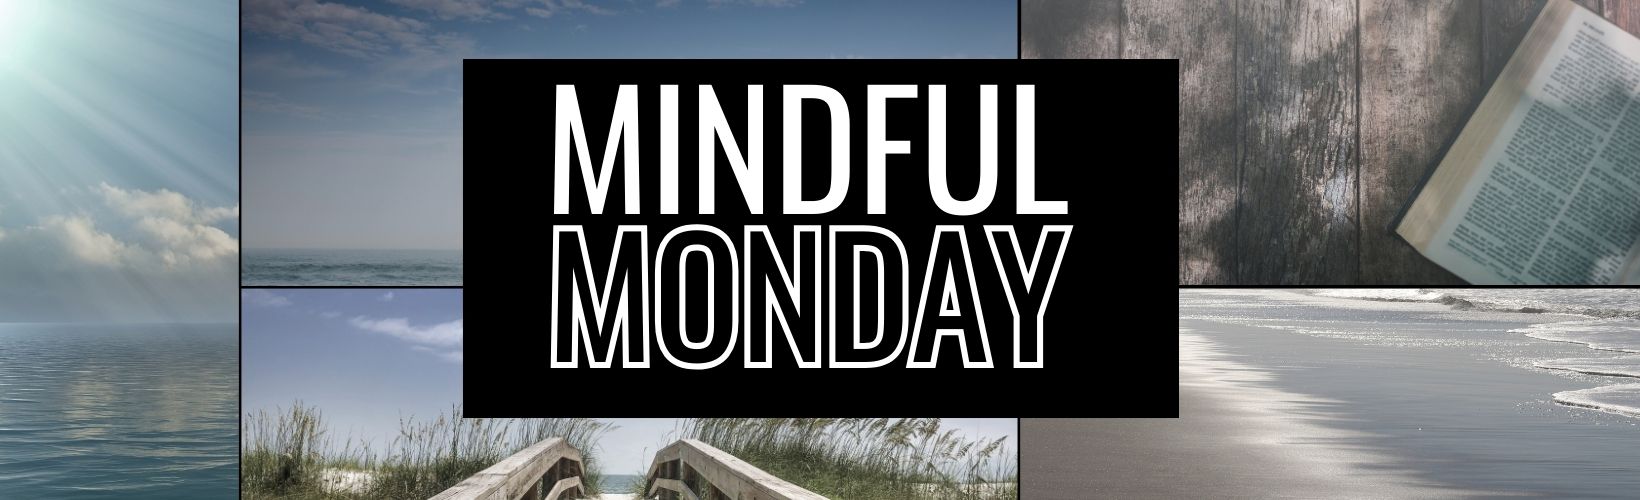 Mindful Monday: Techniques to Stay Calm and Focused